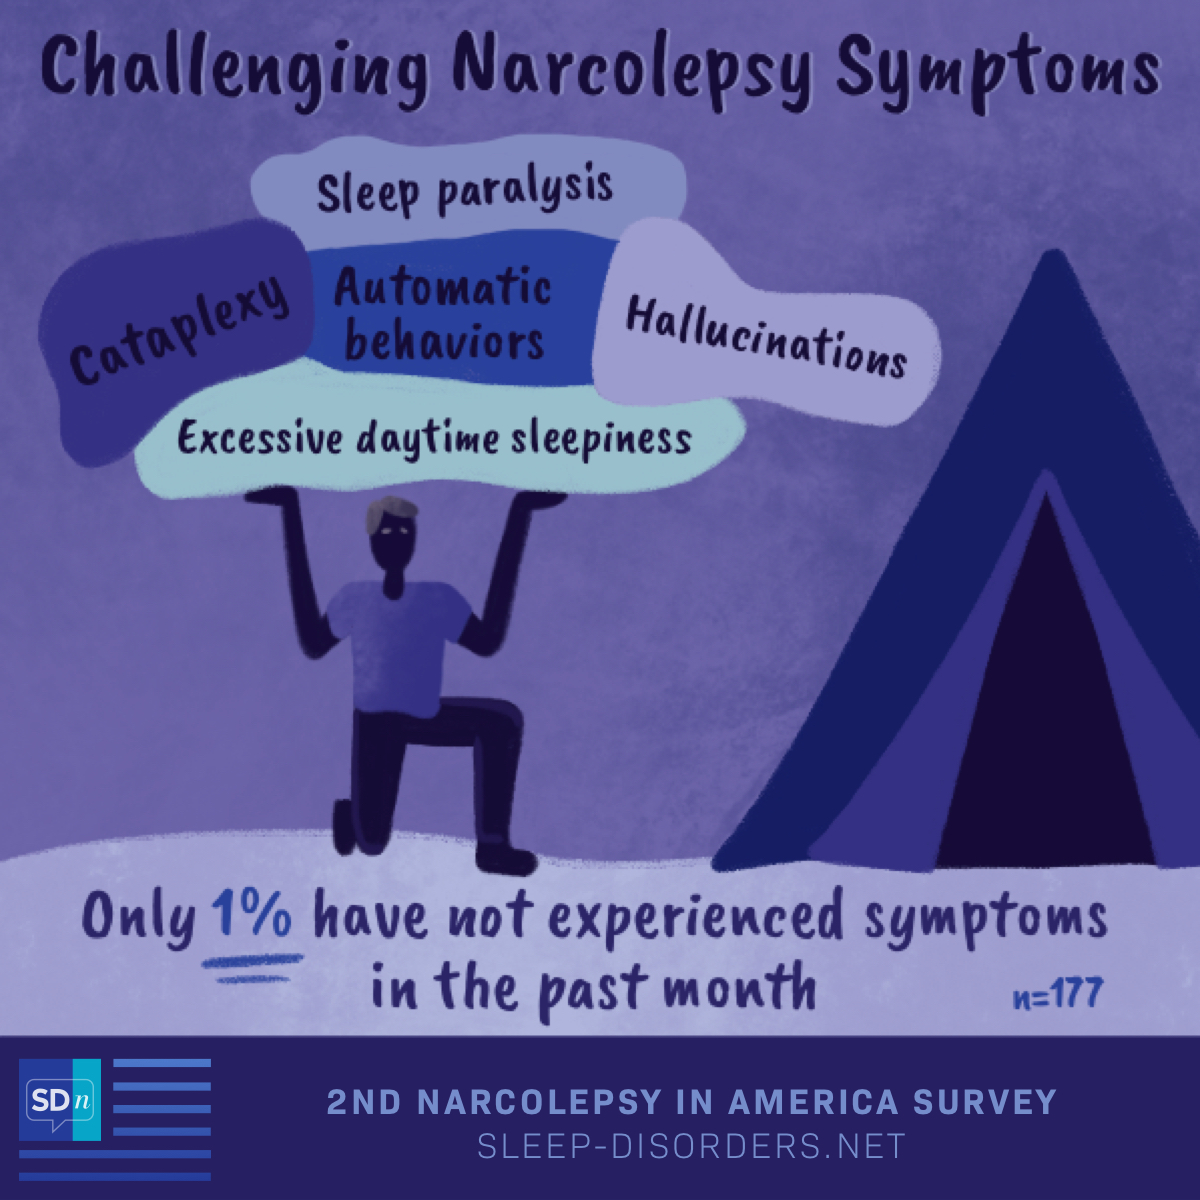 Challenging narcolepsy symptoms include sleep paralysis, excessive daytime sleepiness, cataplexy, and hallucinations.